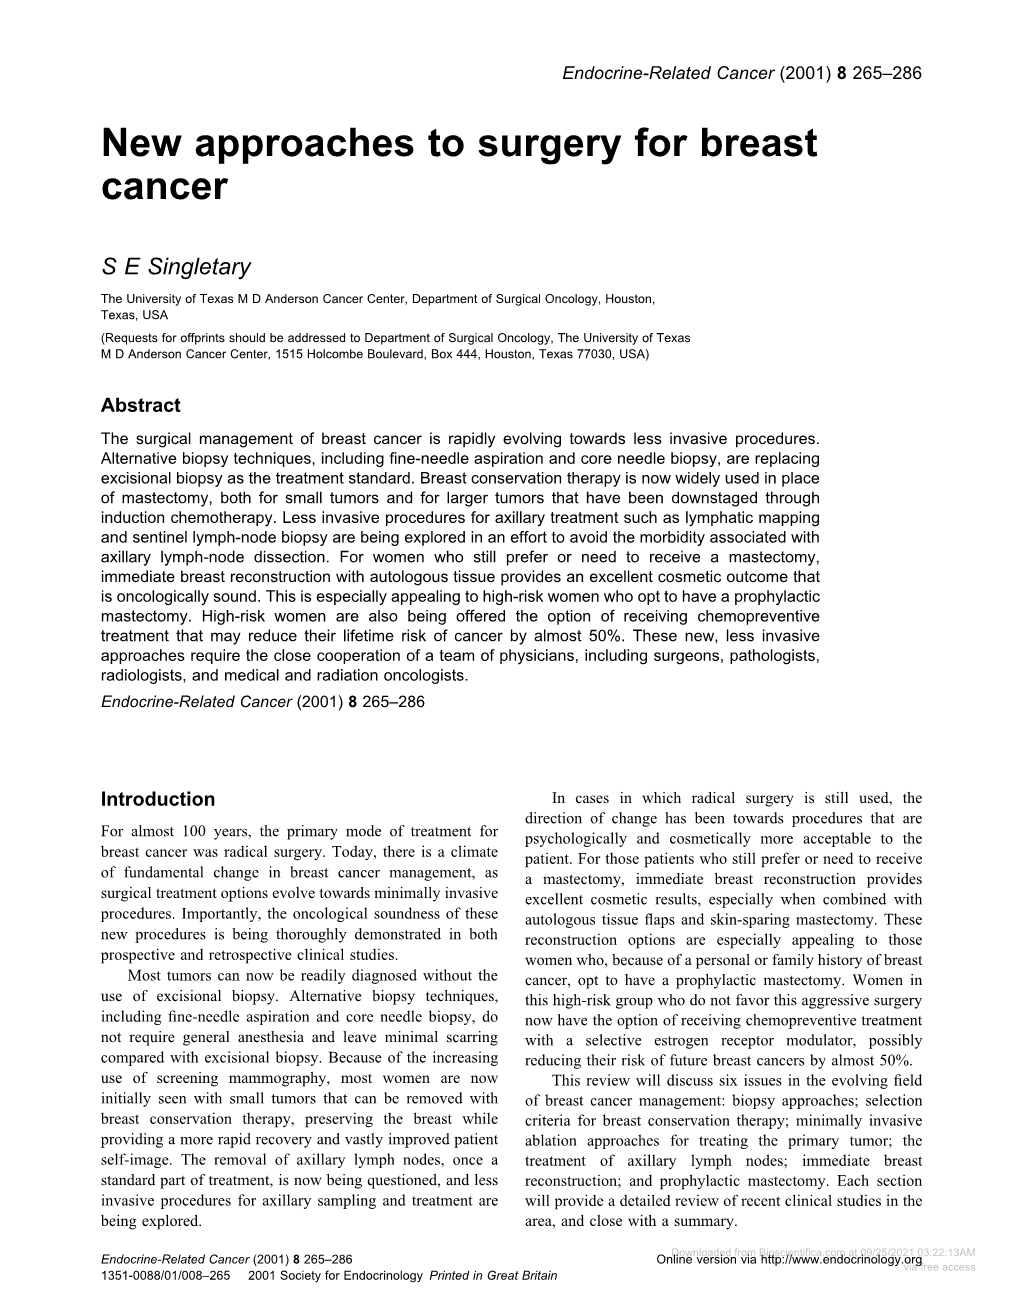 New Approaches to Surgery for Breast Cancer